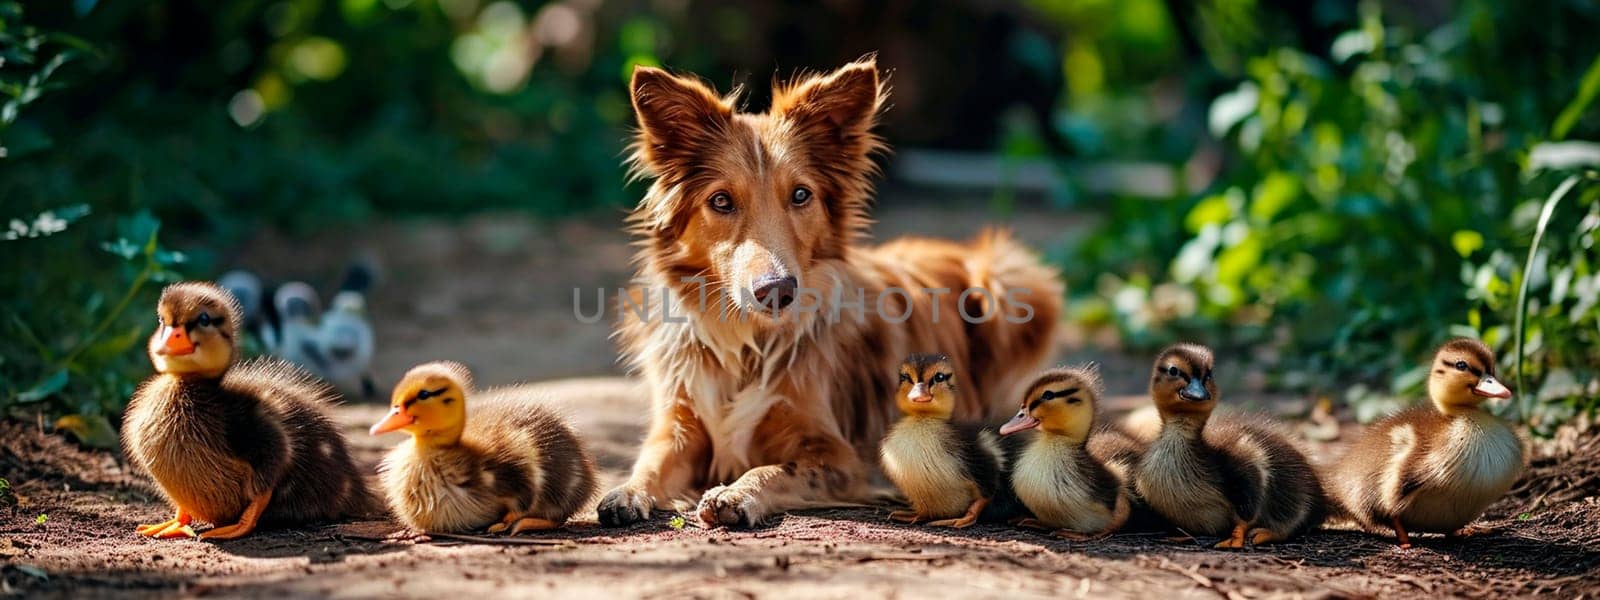 Dog with ducklings in the yard. Selective focus. by yanadjana